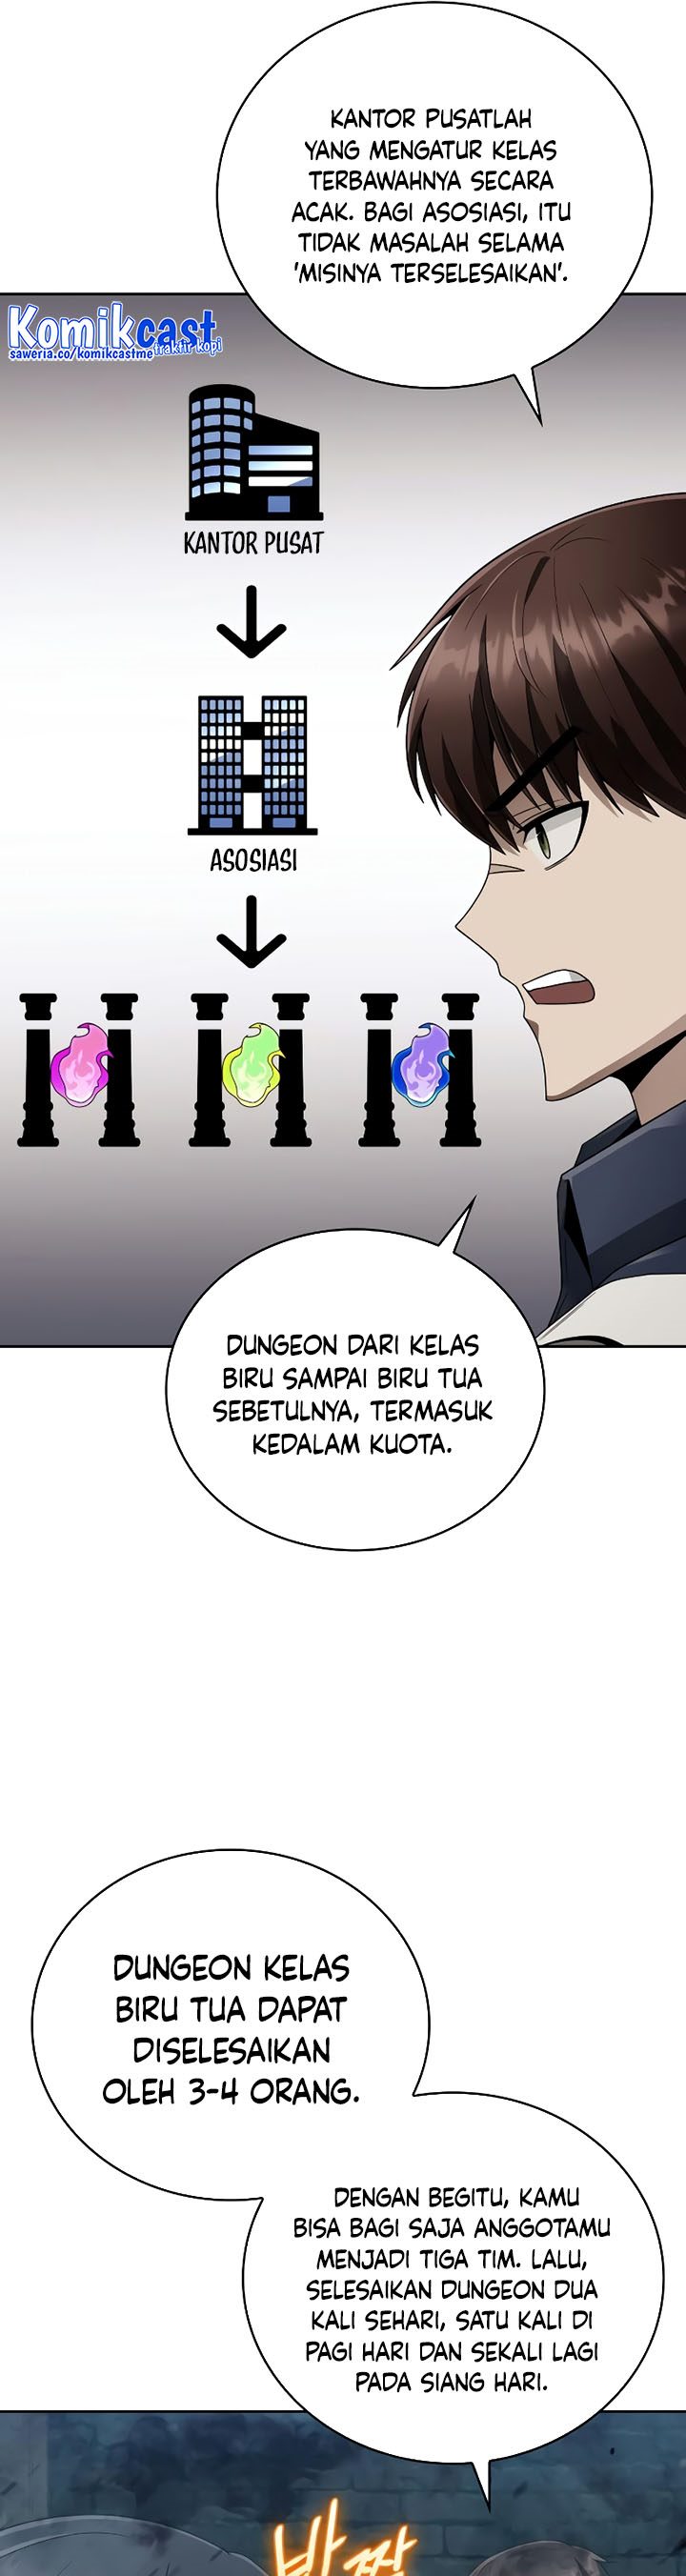 Dilarang COPAS - situs resmi www.mangacanblog.com - Komik clever cleaning life of the returned genius hunter 019 - chapter 19 20 Indonesia clever cleaning life of the returned genius hunter 019 - chapter 19 Terbaru 10|Baca Manga Komik Indonesia|Mangacan